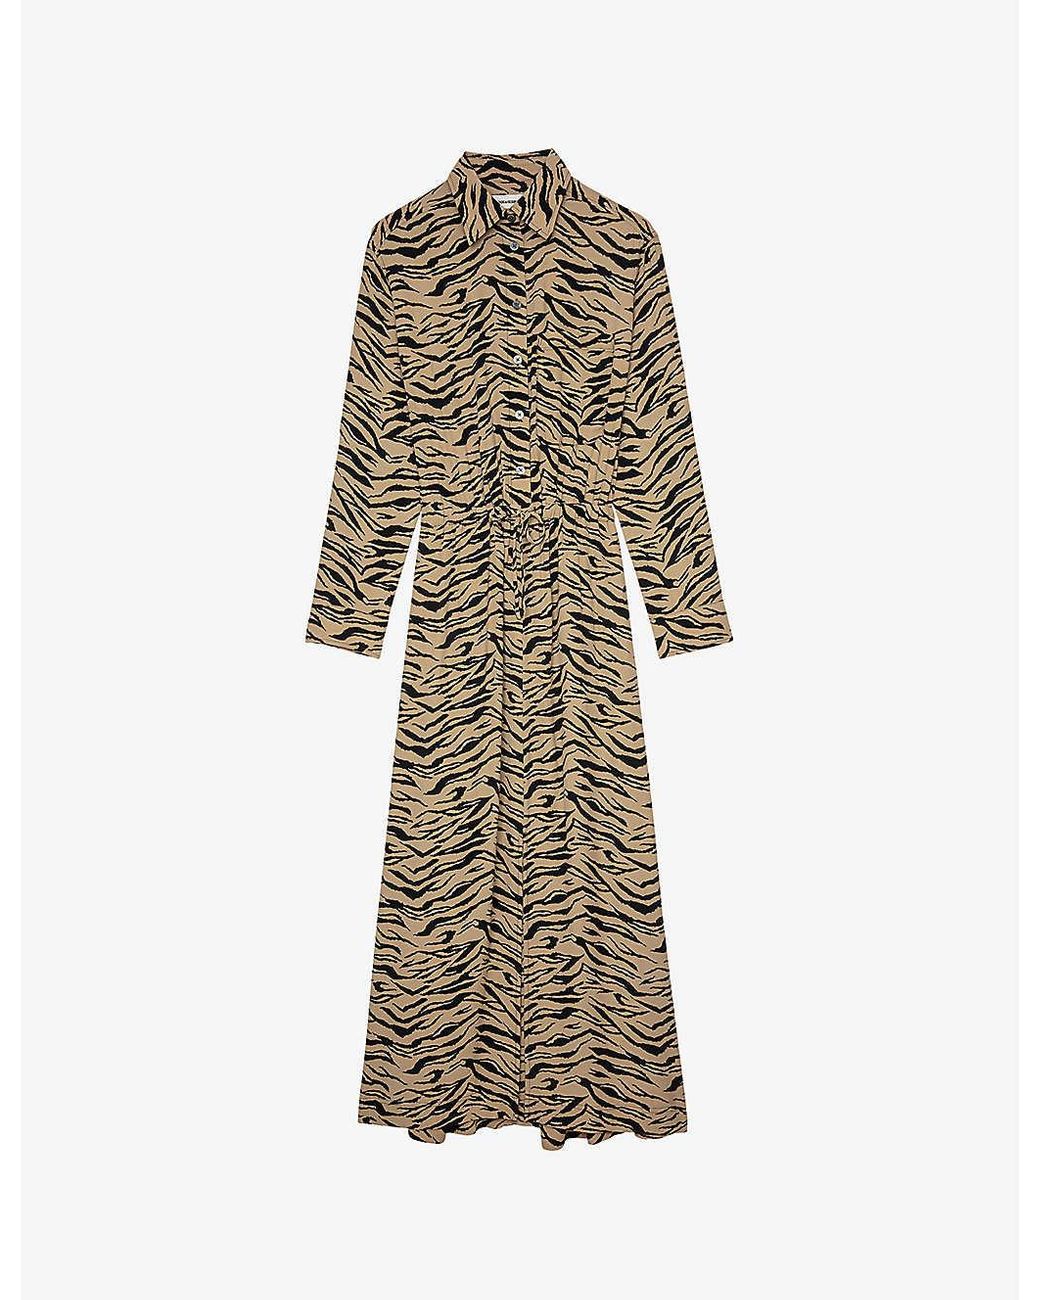 Zadig & Voltaire Radial Tiger-print Woven Maxi Dress in Natural | Lyst